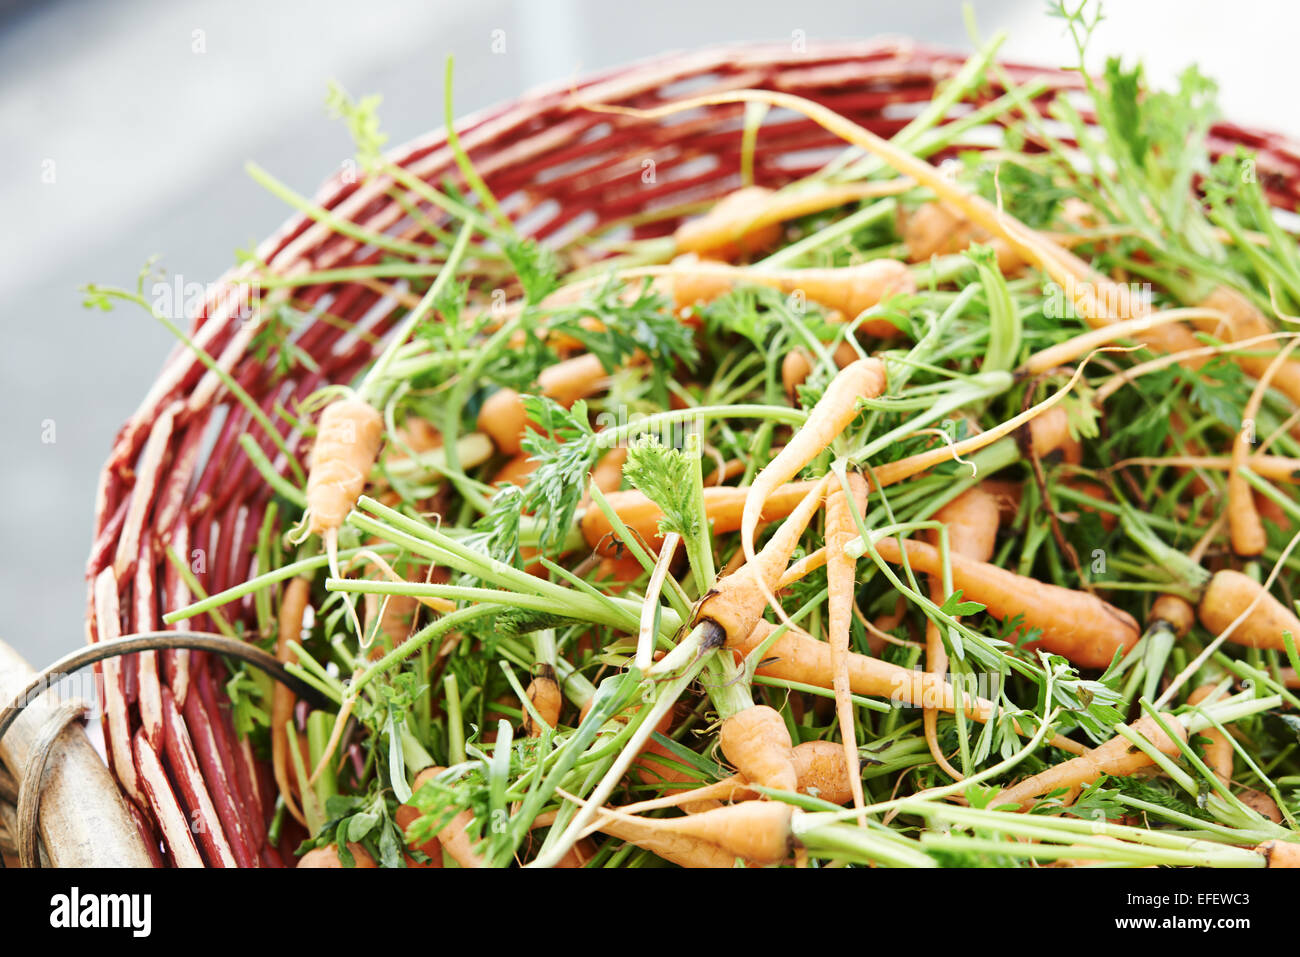 Baby carrots with green stems in red basket at farmers market Food Photography Stock Photo